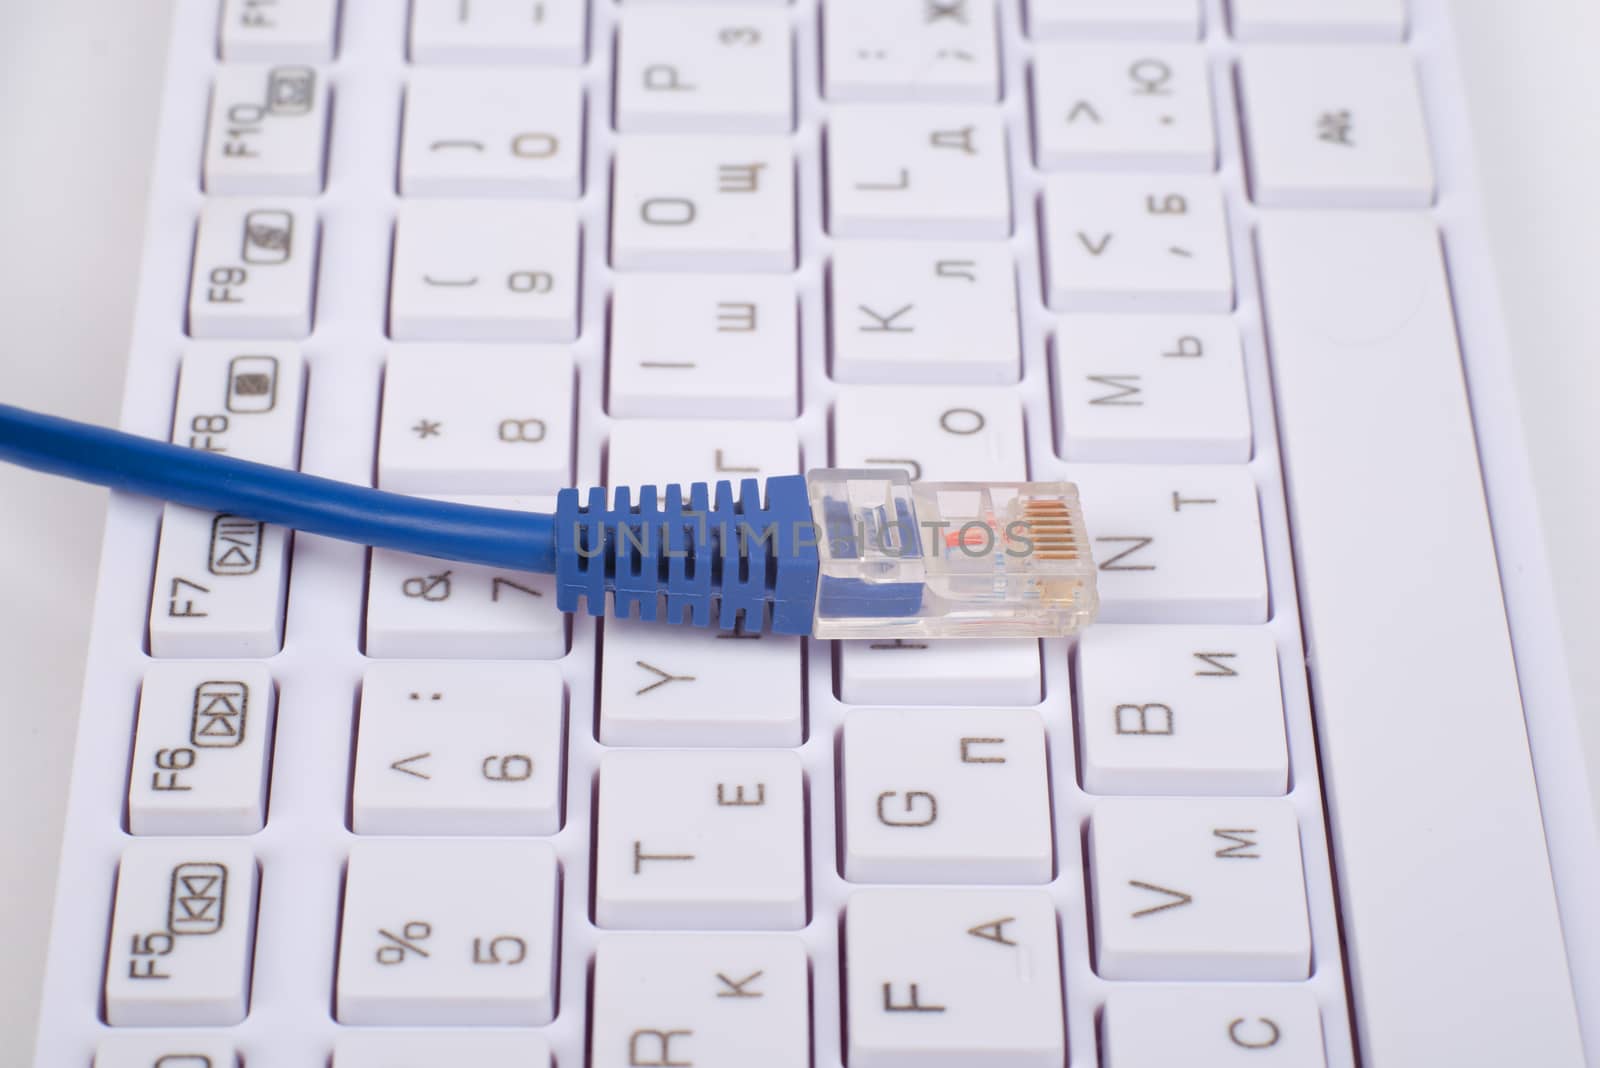 Blue computer cable on keyboard, close up view